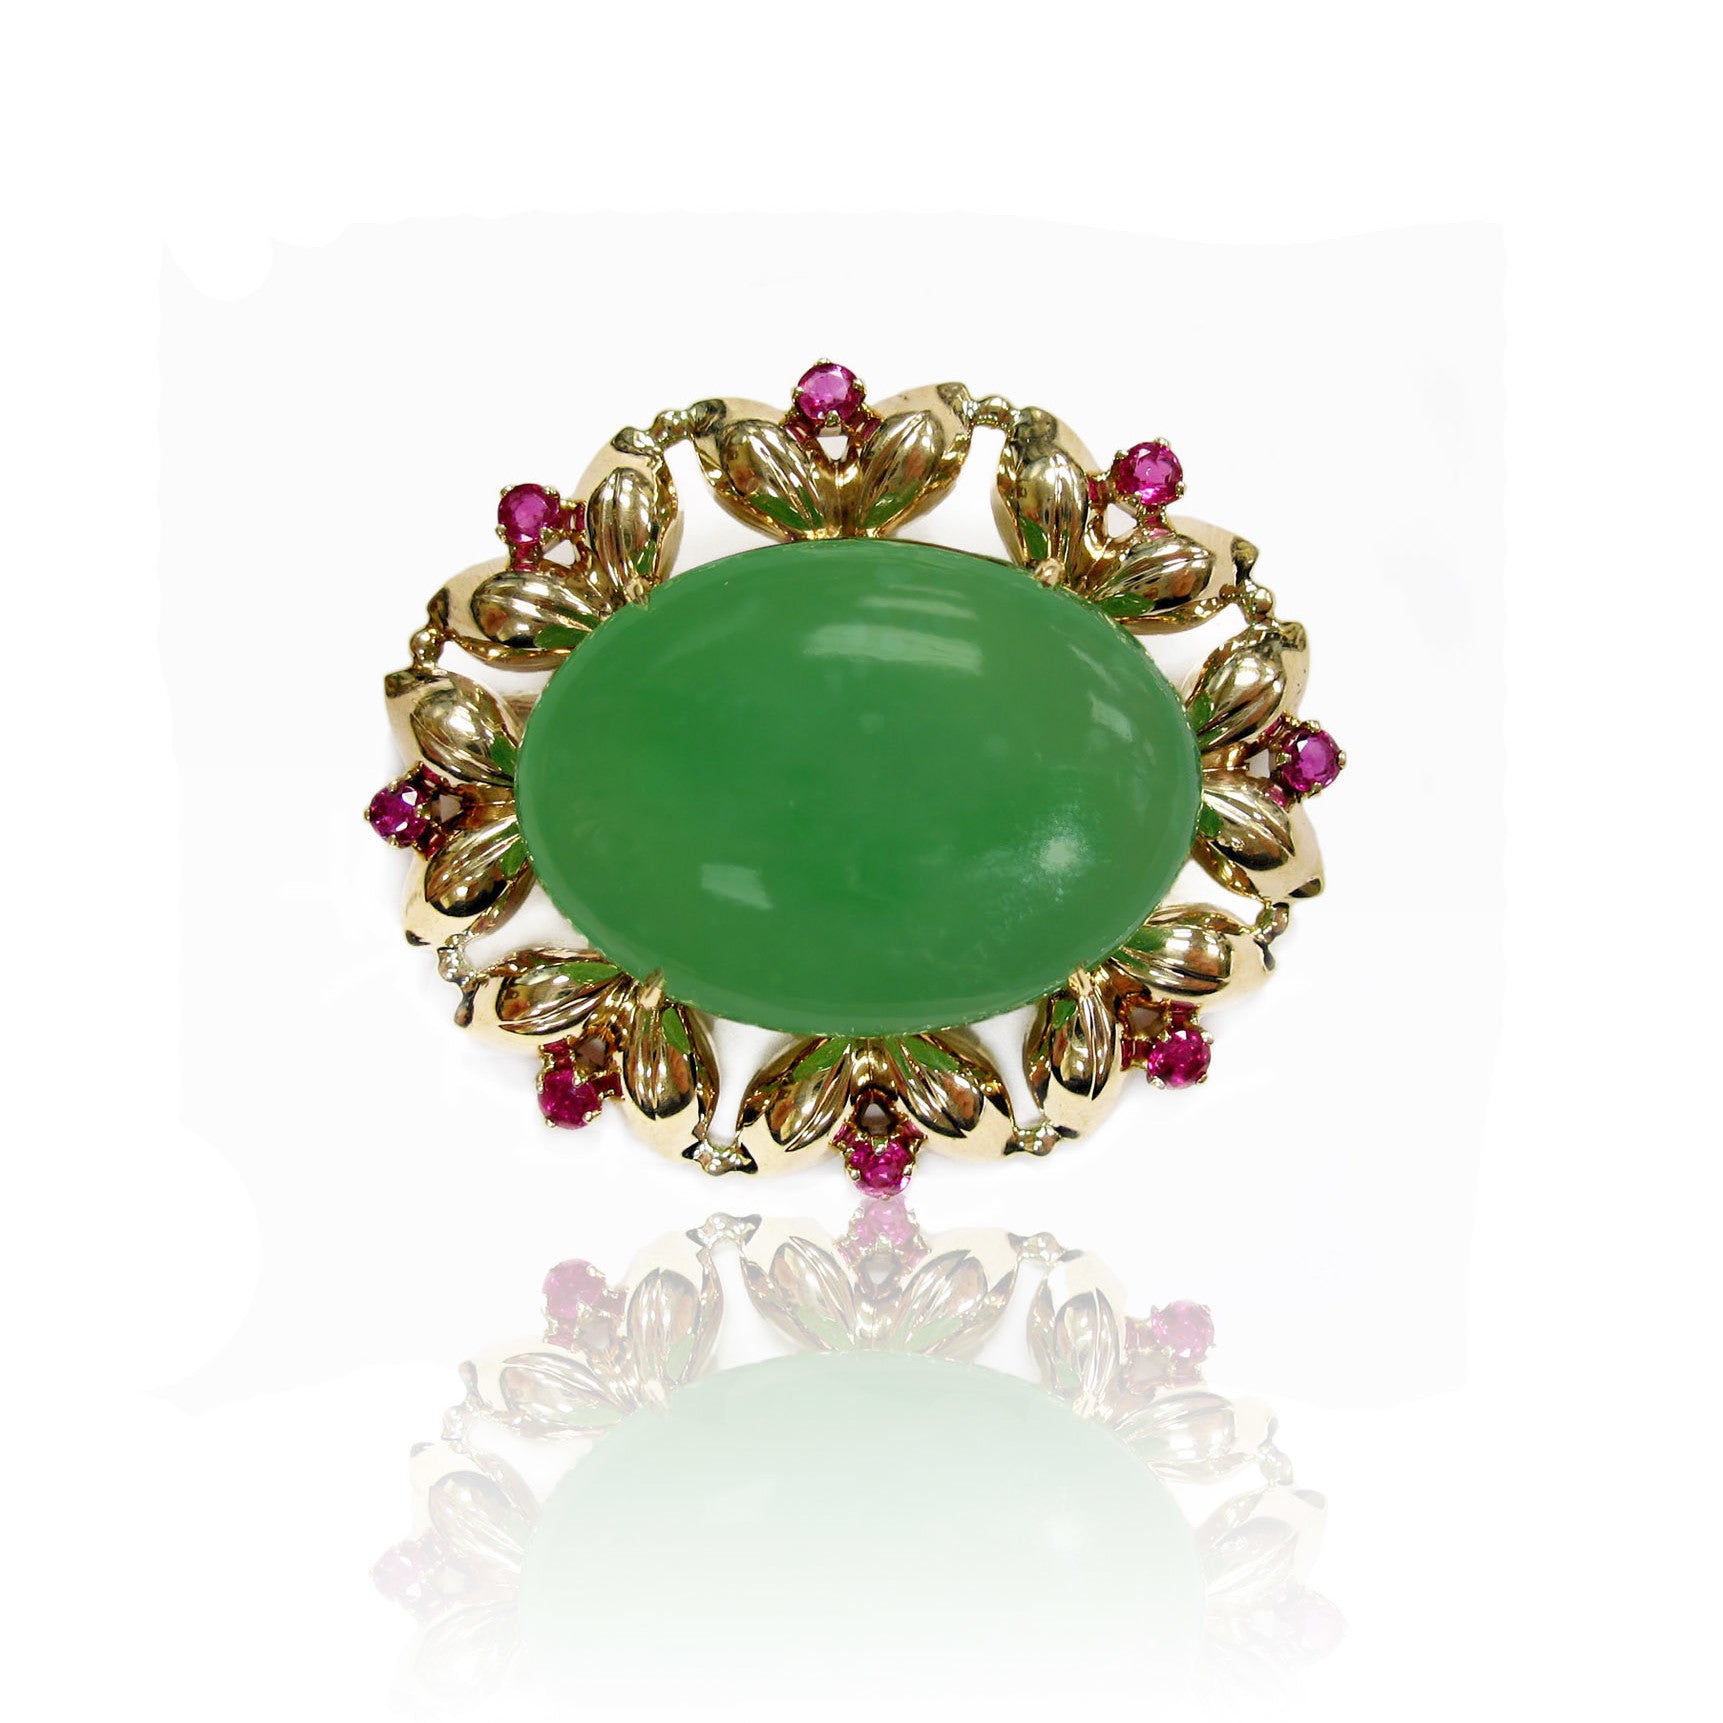 Tiffany & Co. 1940s 14KT Yellow Gold Jade & Ruby Brooch front view